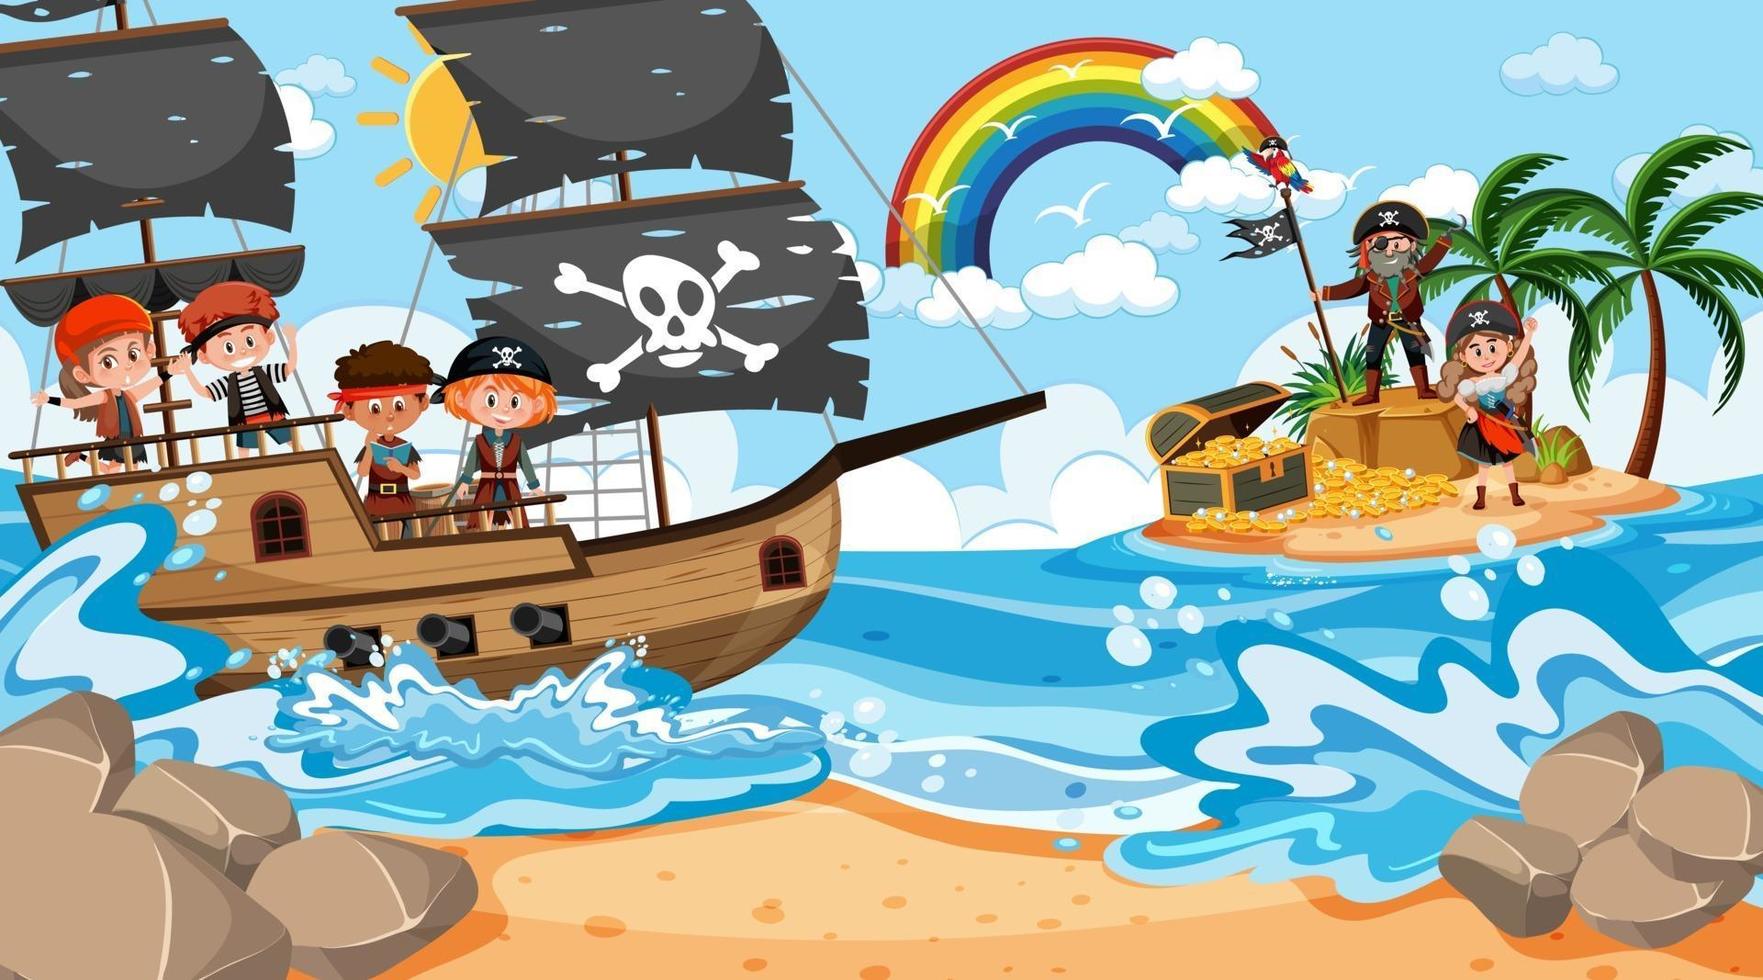 Treasure Island scene at daytime with Pirate kids on the ship vector